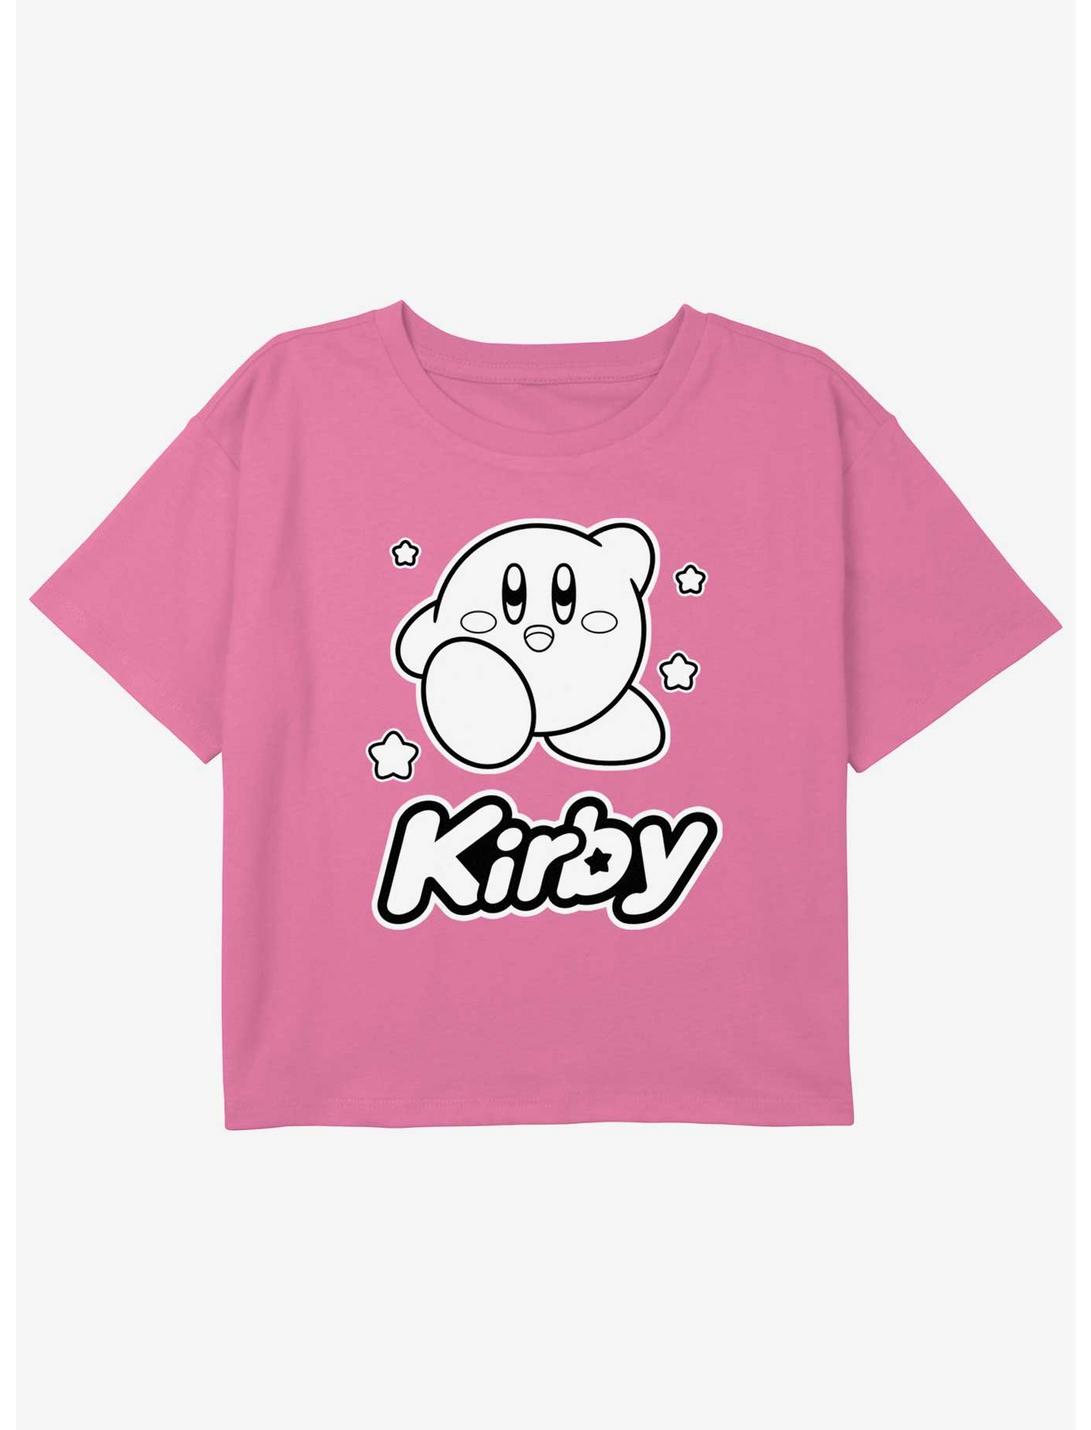 Kirby Monochrome Kirby Girls Youth Crop T-Shirt, PINK, hi-res